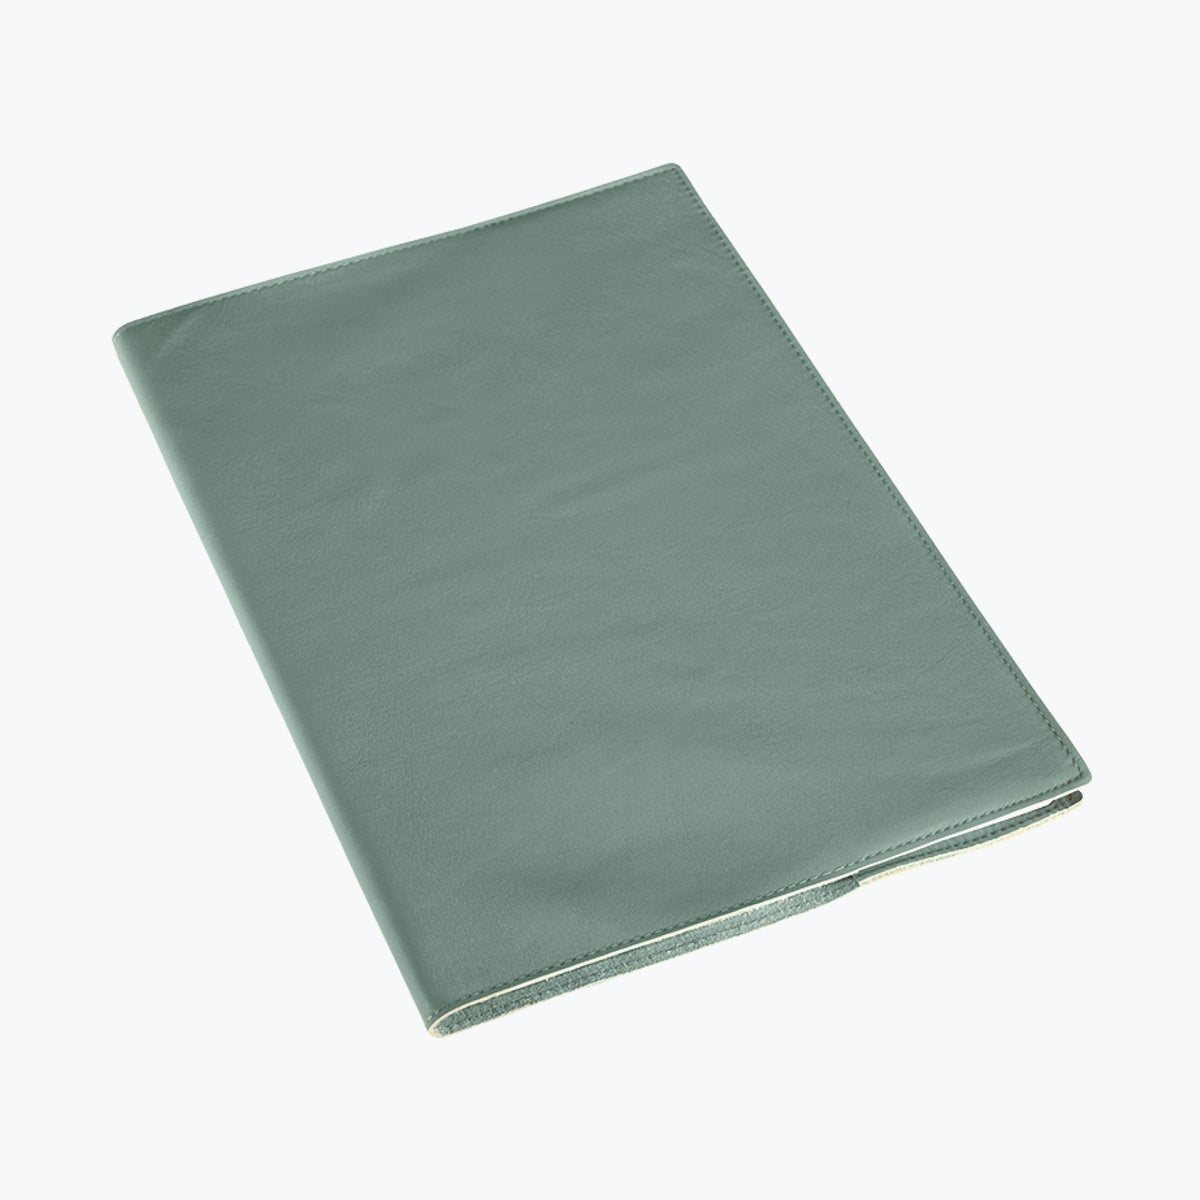 Bookbinders Design - Notebook - Leather - A4 - Dusty Green